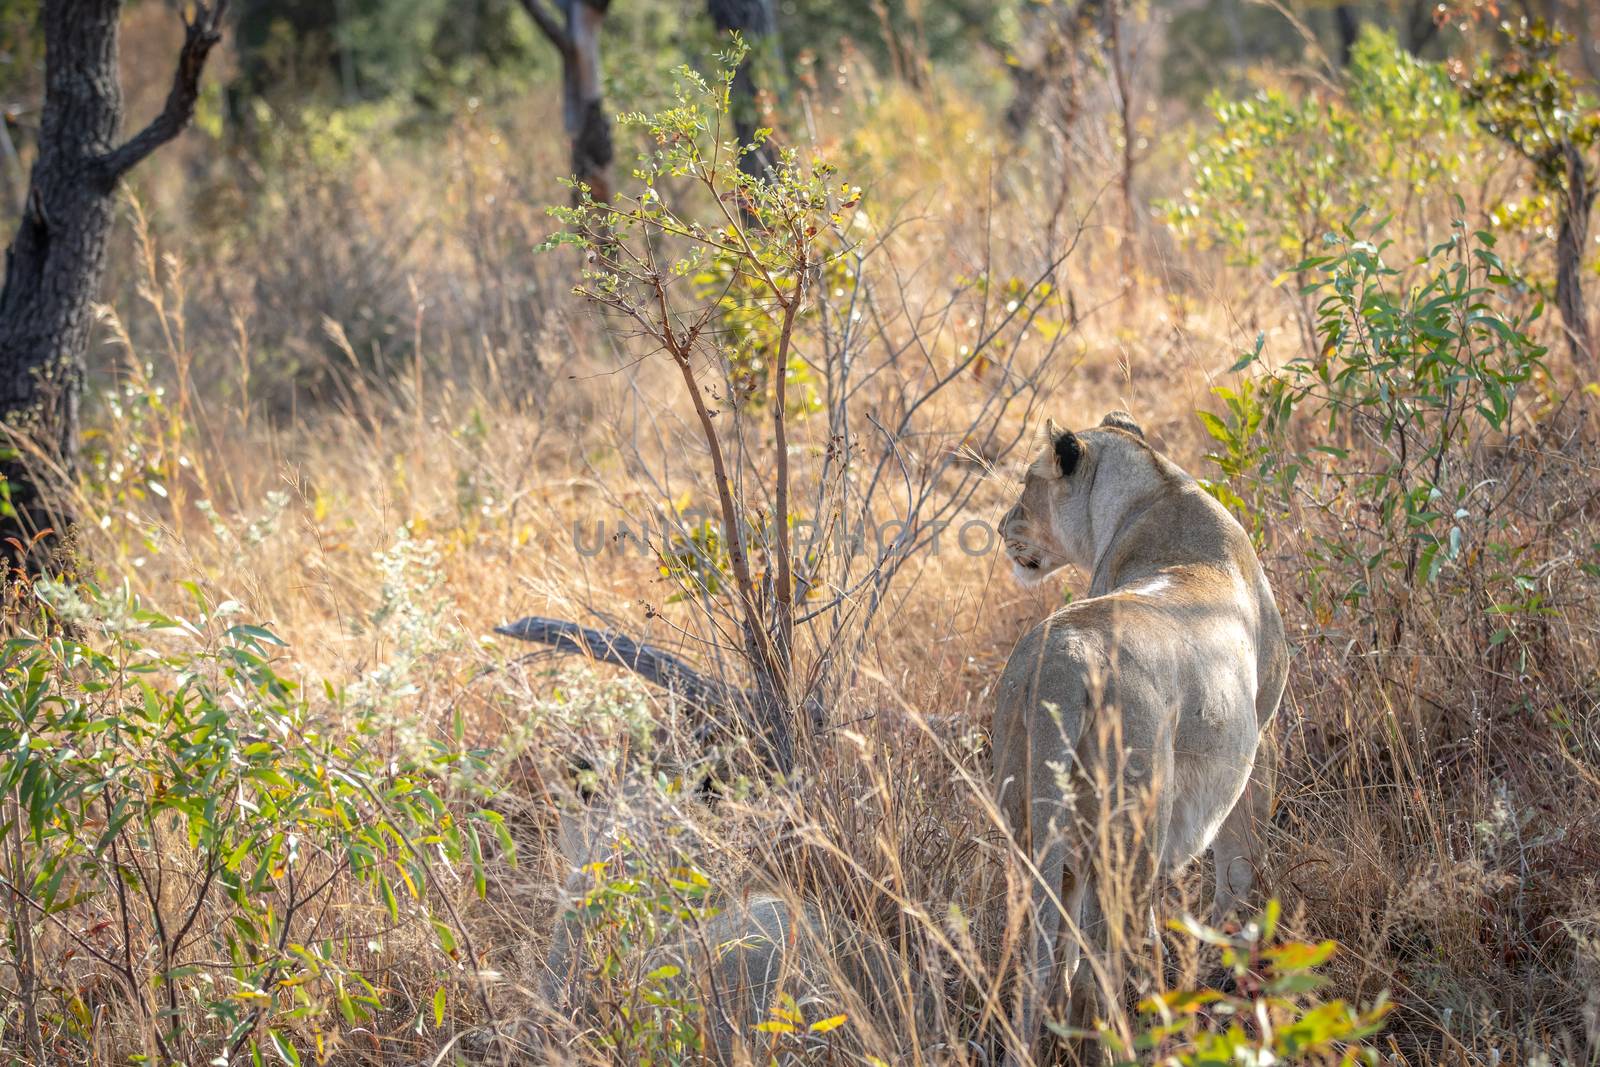 Lioness standing in the grass and looking in the Welgevonden game reserve, South Africa.